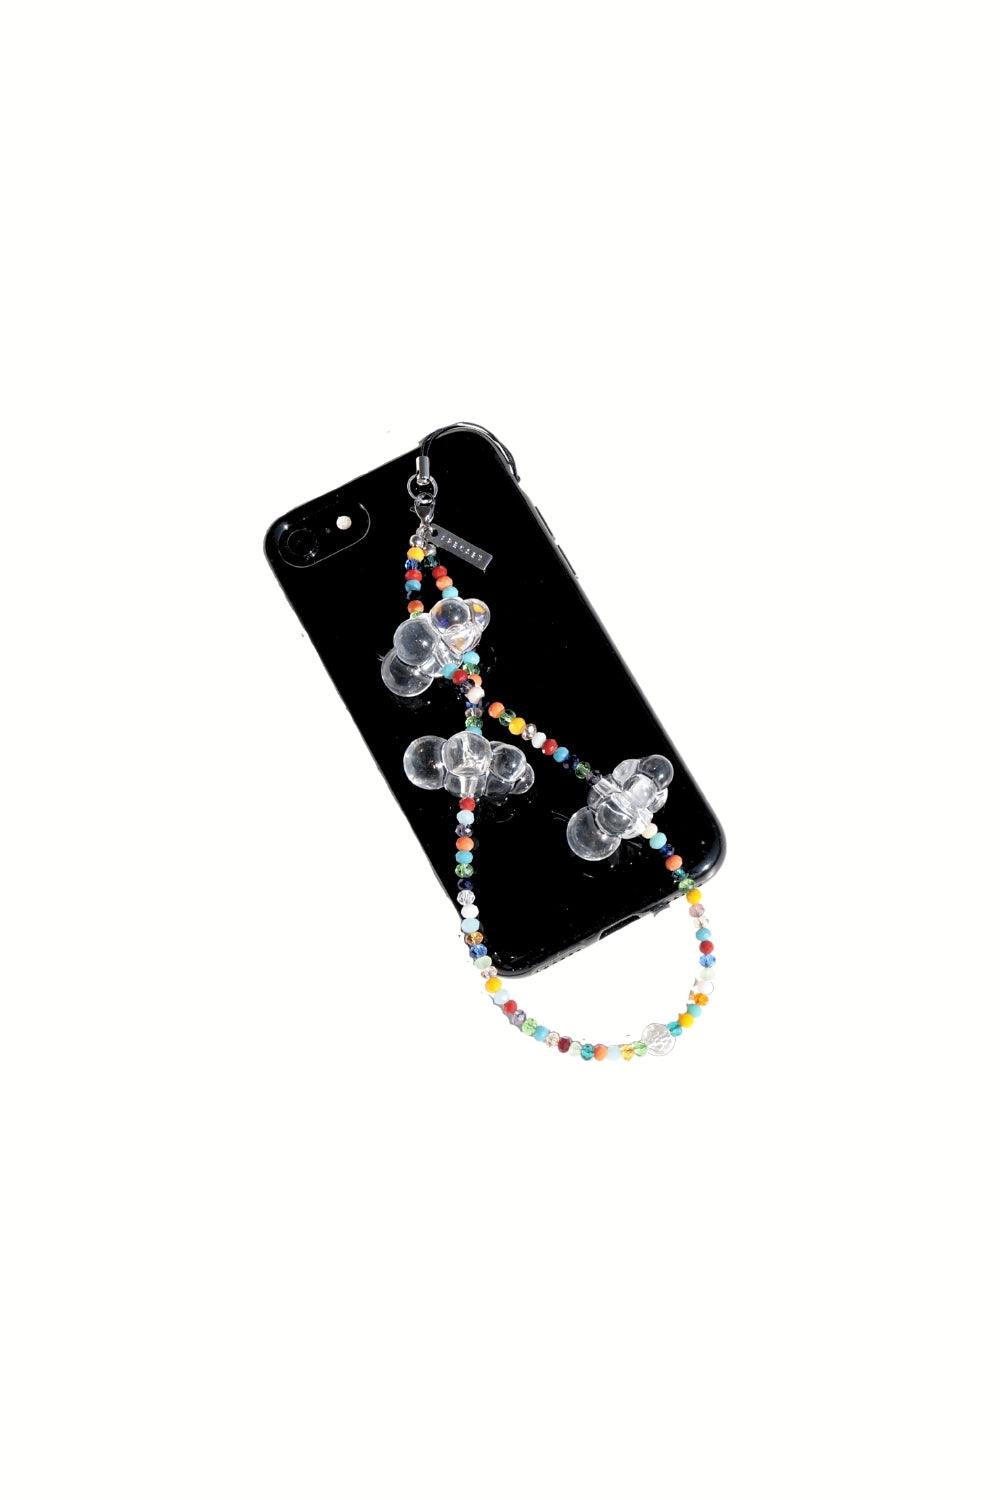 BRIGHT SKY - COLORFUL Wrist Phone Strap | SPECSET